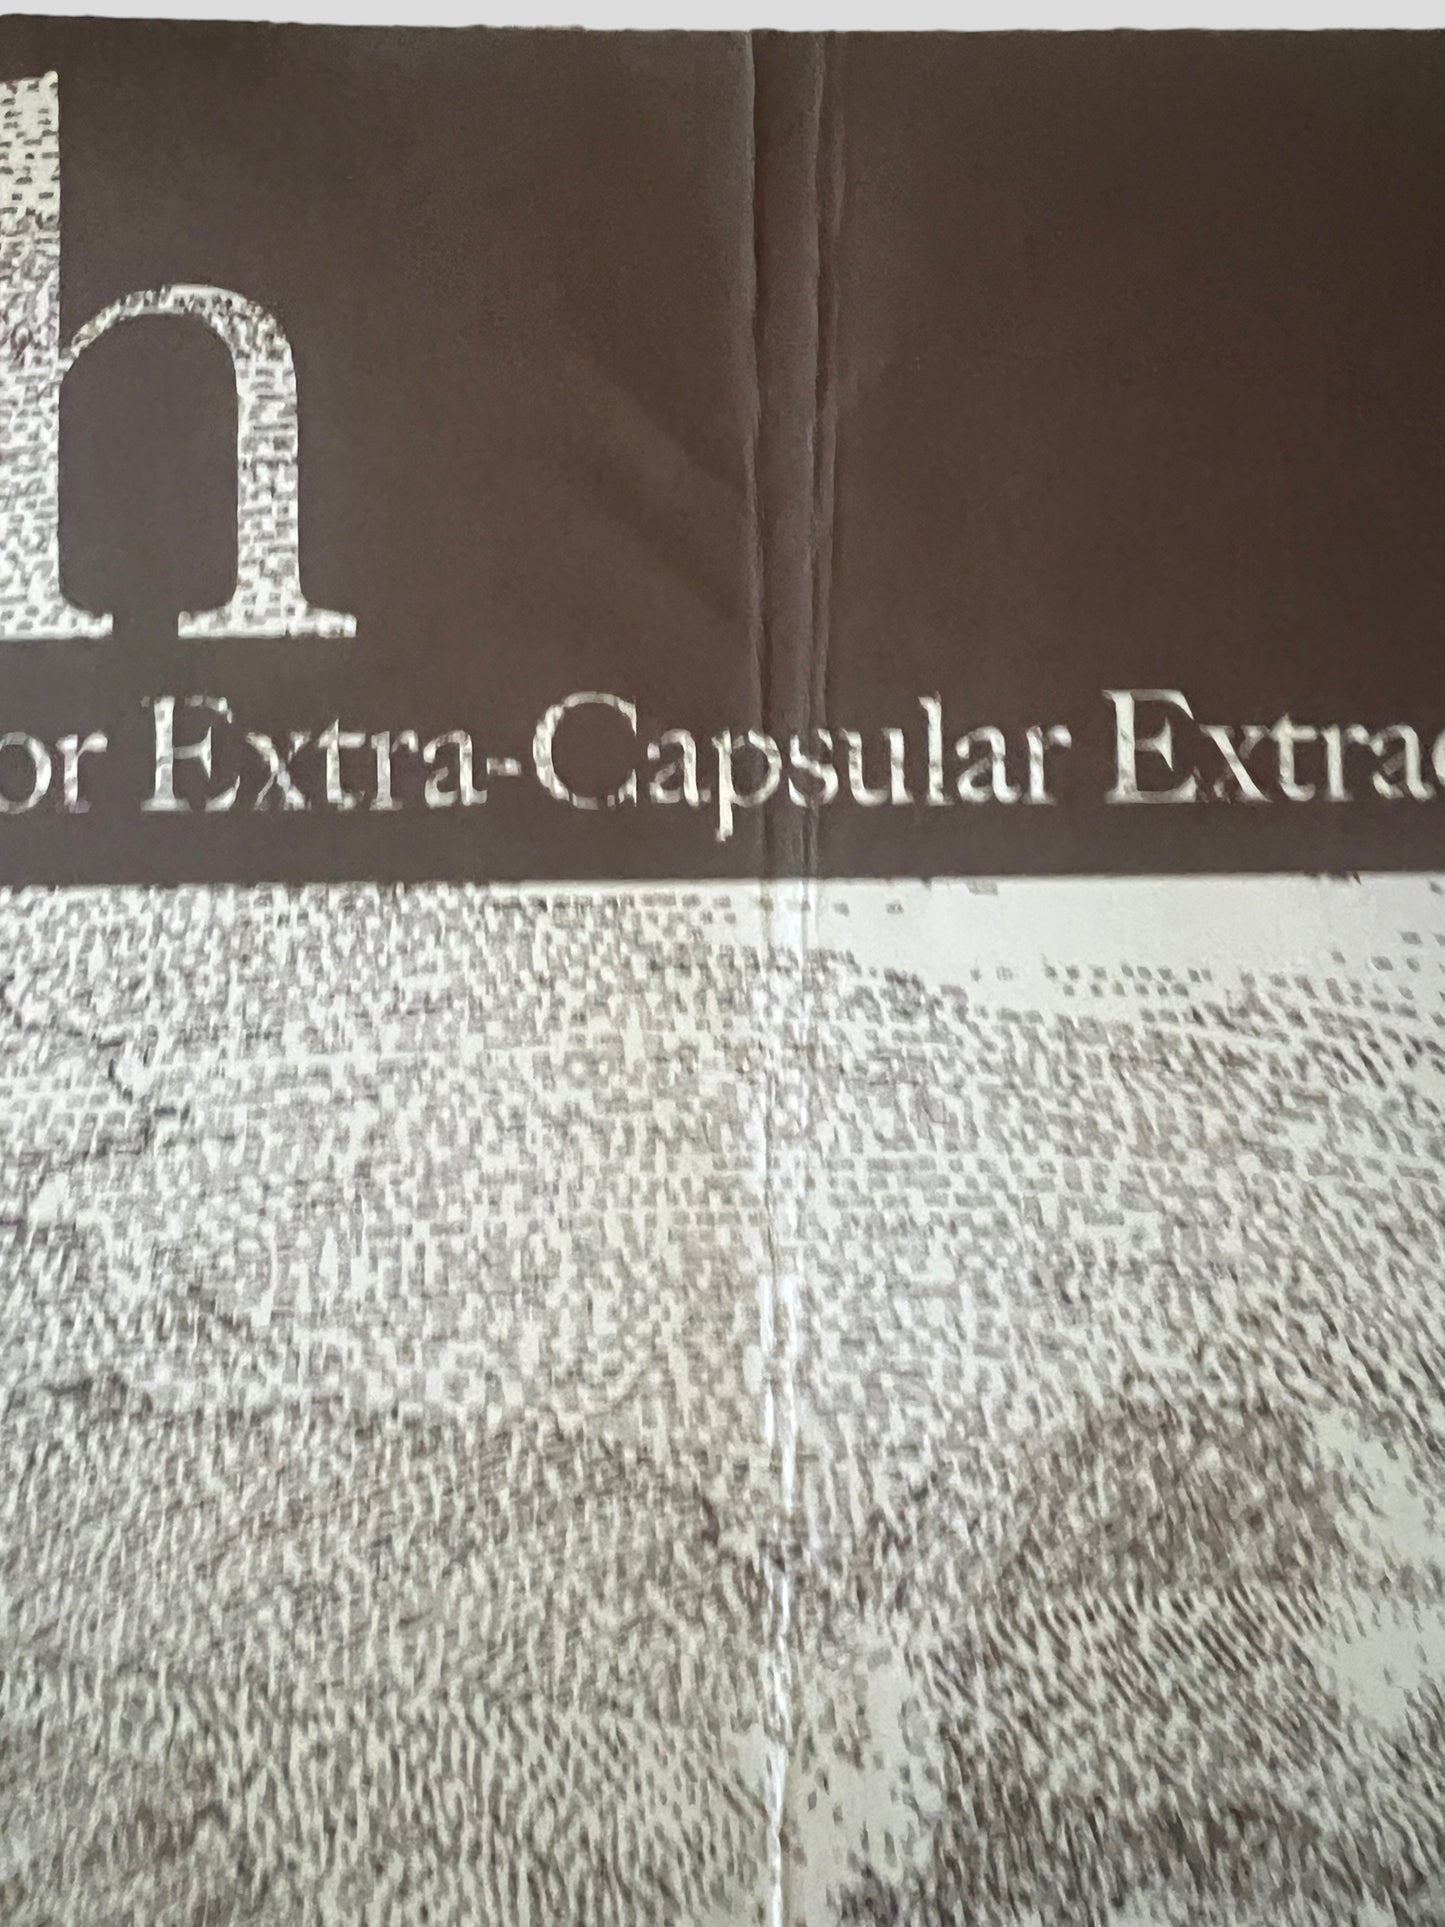 Earth - A Bureaucratic Desire for Extra-Capsular Extraction 2010 Promo Poster 18 x 24 inches